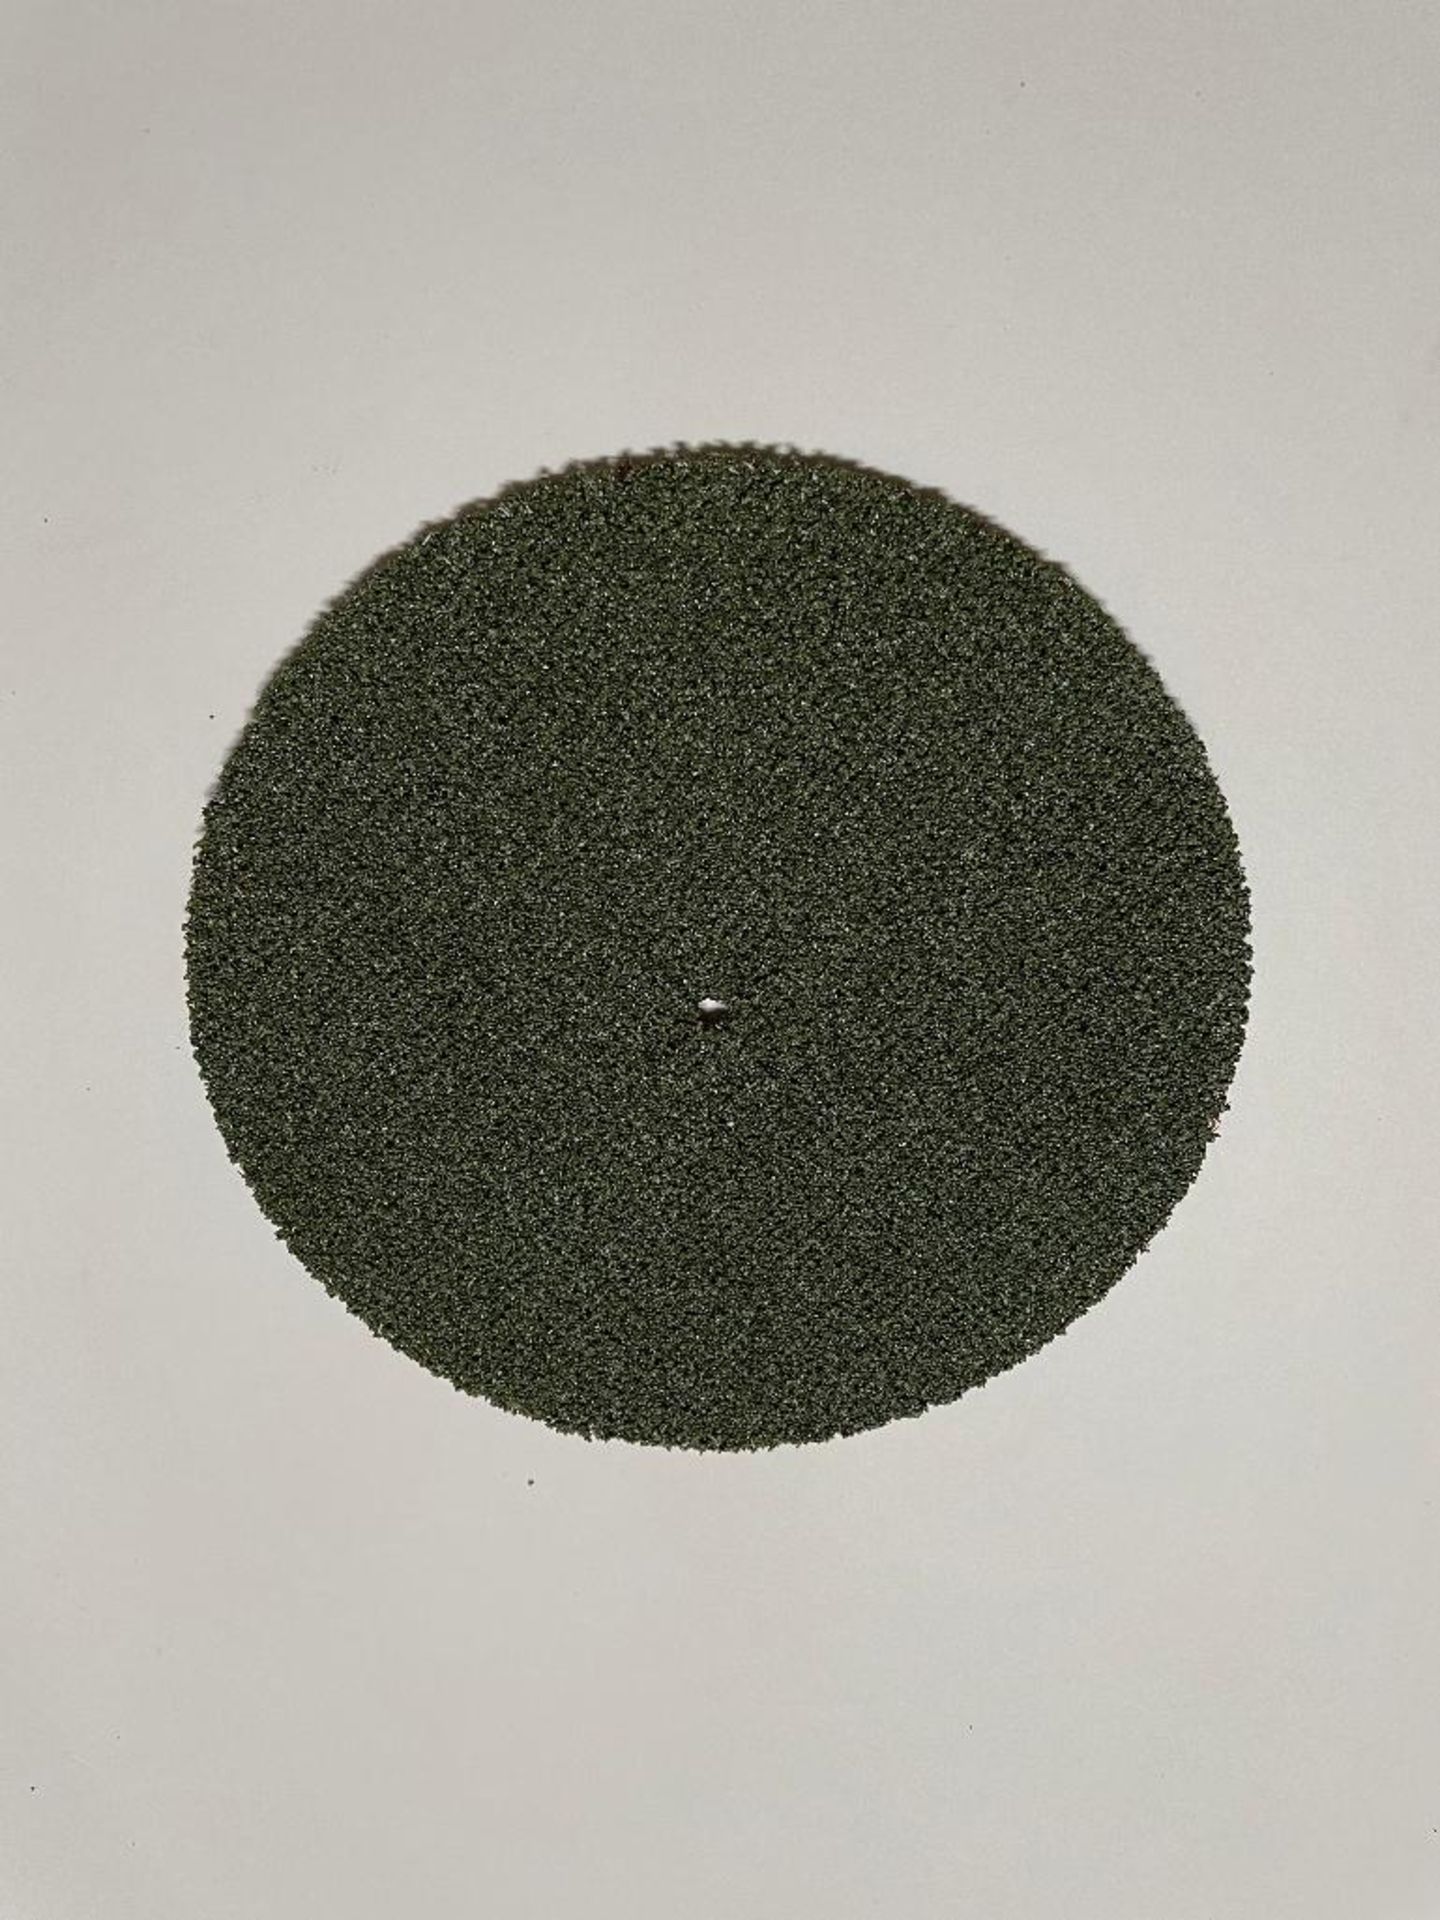 DESCRIPTION (2) CASES OF 7" GREEN NET CUTTING DISCS. 200 PER CASE. BRAND / MODEL EAZY POWER 87137 TO - Image 4 of 5